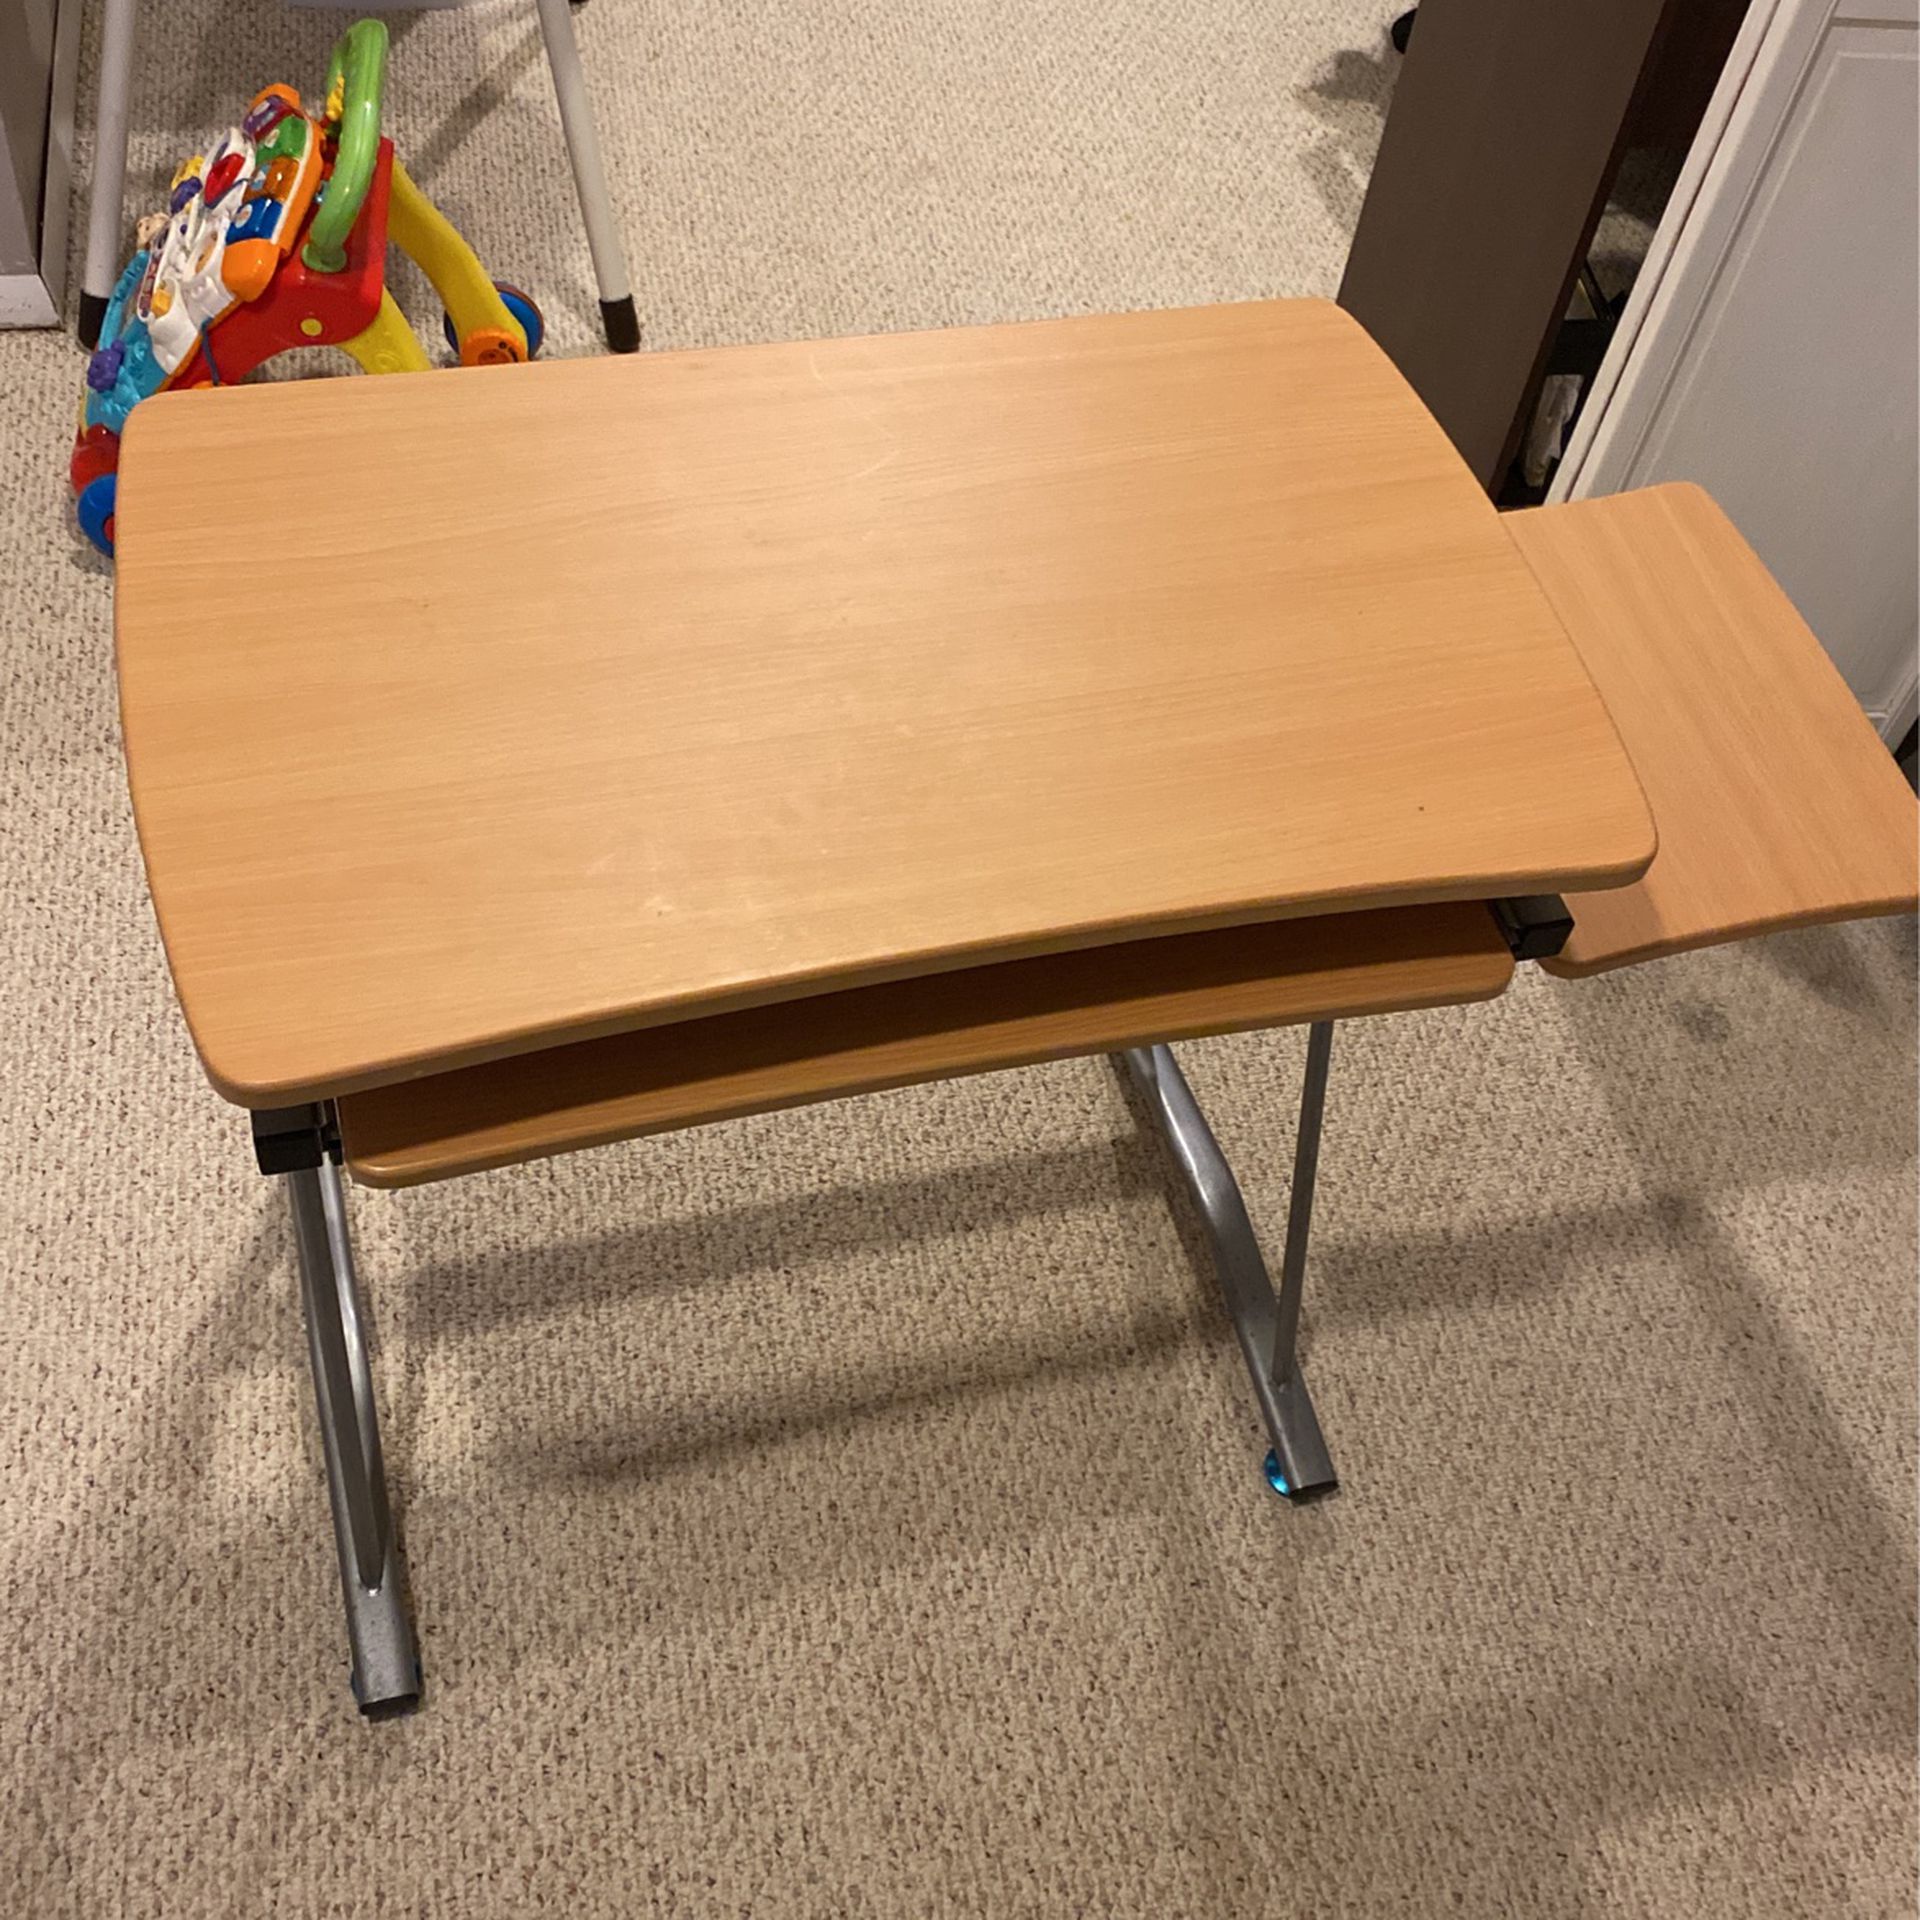 Office Desk With Pull Out - Free!!! Come Pick Up 